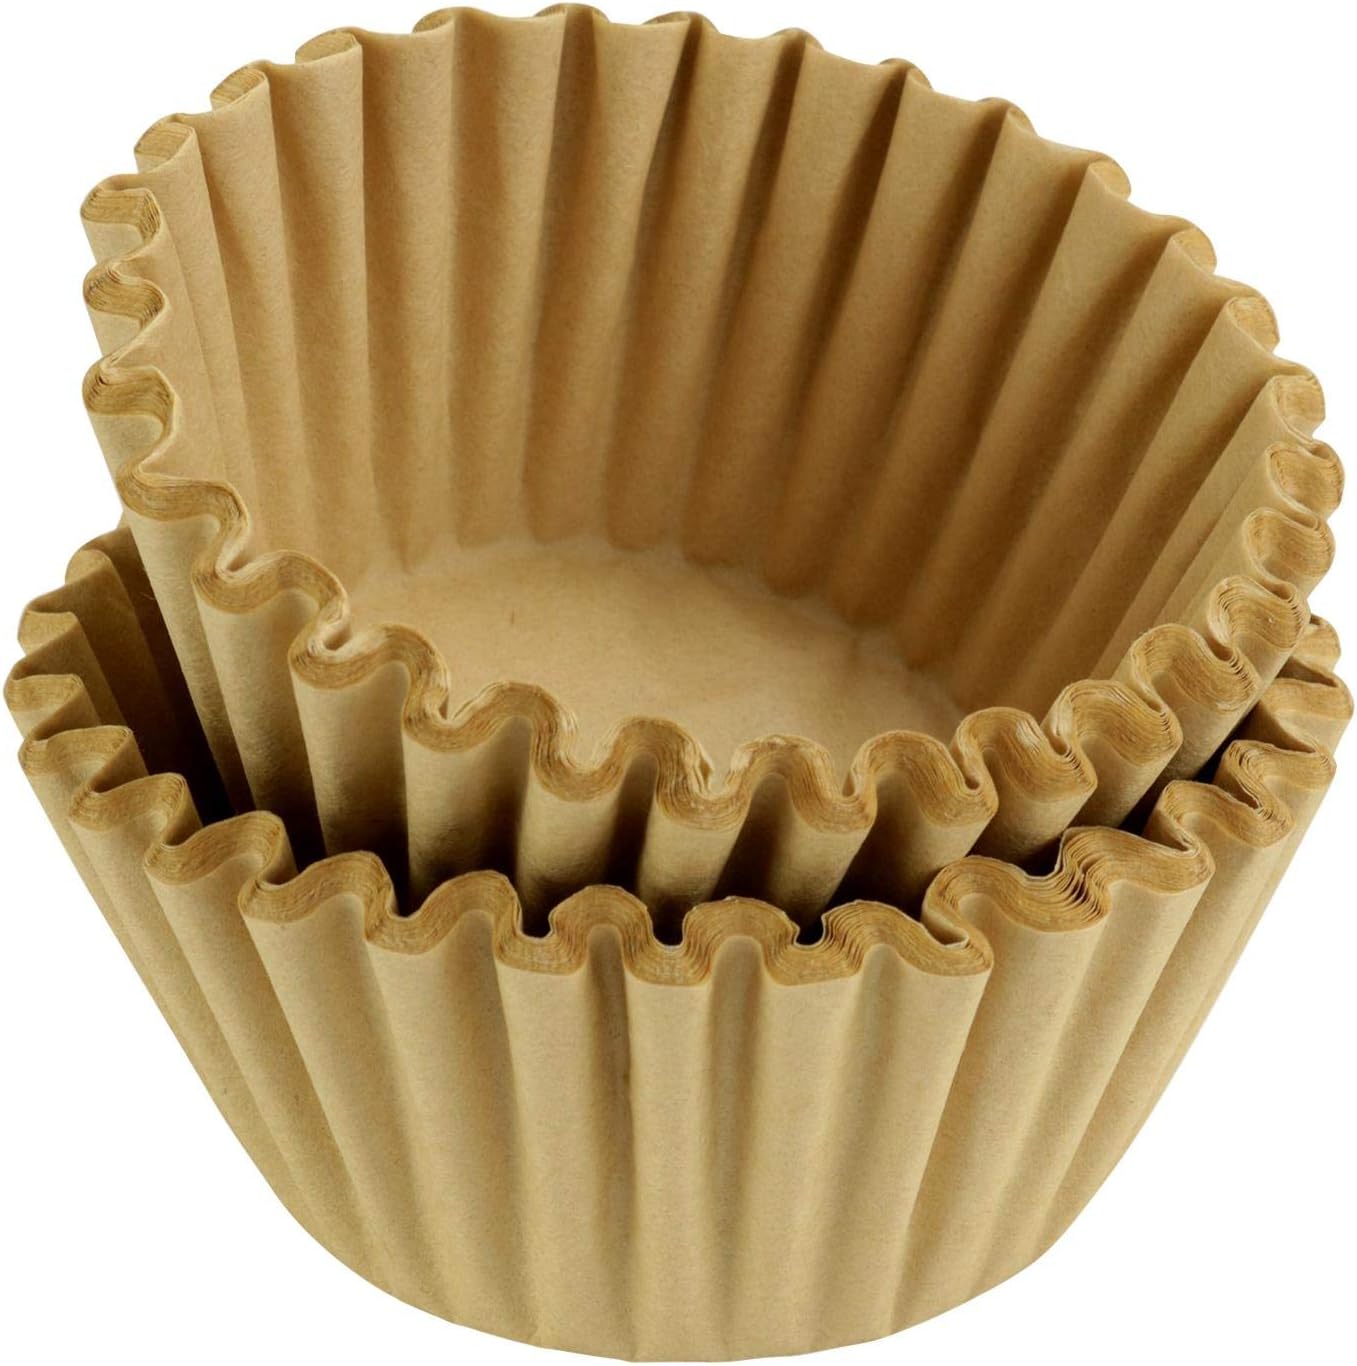 My husband and I still use a coffee pot and have never steered away from the non-bleached coffee filters. There is no lingering taste at all. You also get a TON of them for a great price.